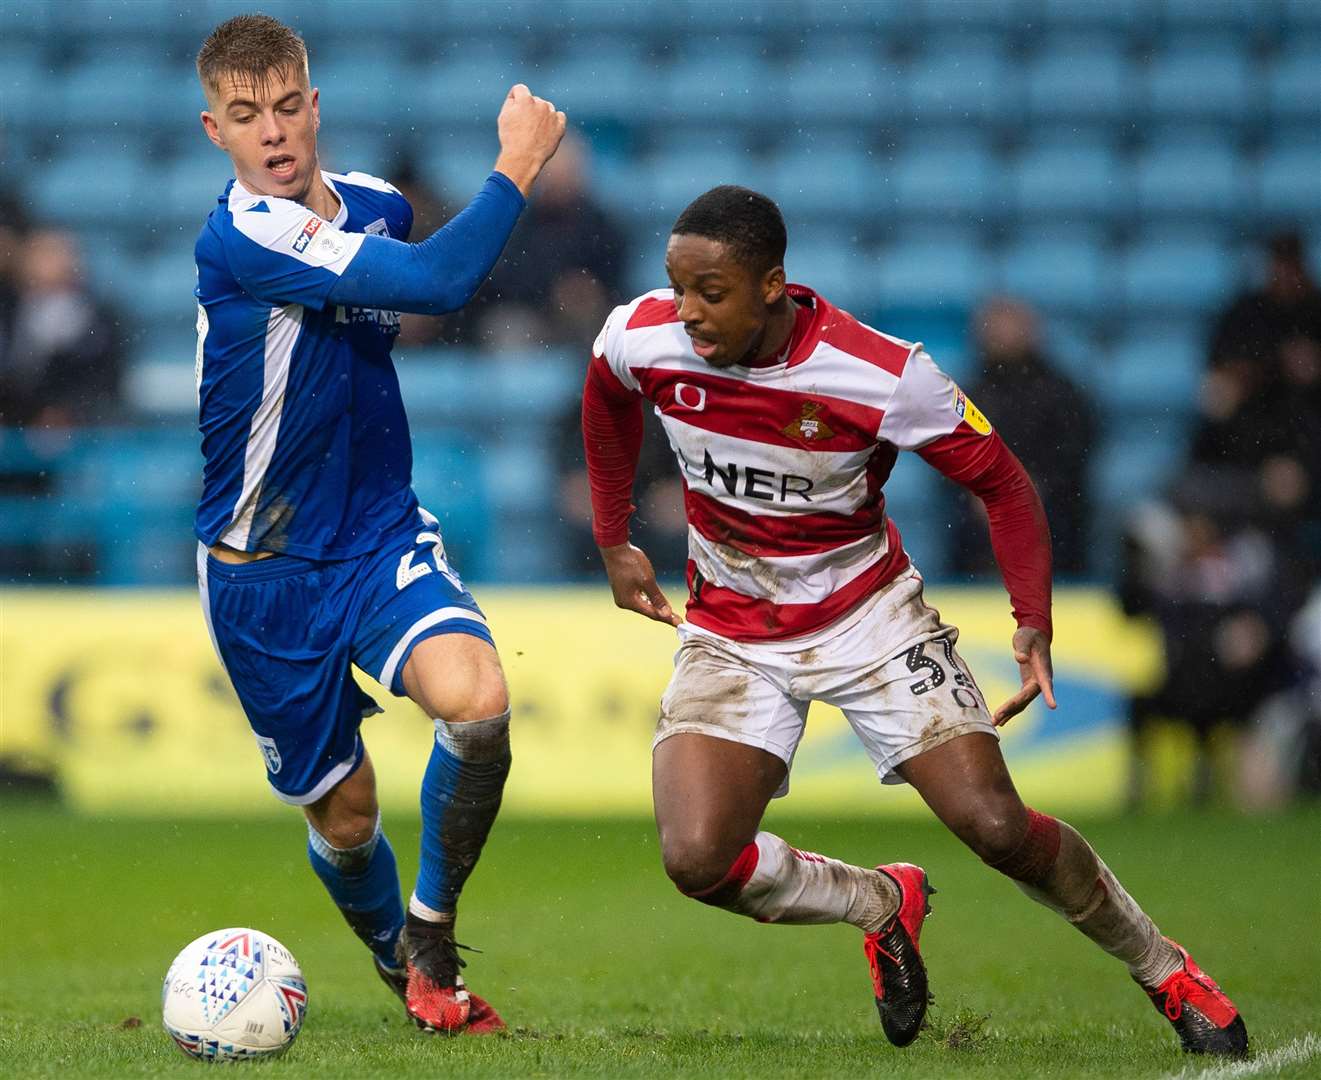 Gills defender Jack Tucker closes in on Doncaster's Niall Ennis on Saturday. Picture: Ady Kerry